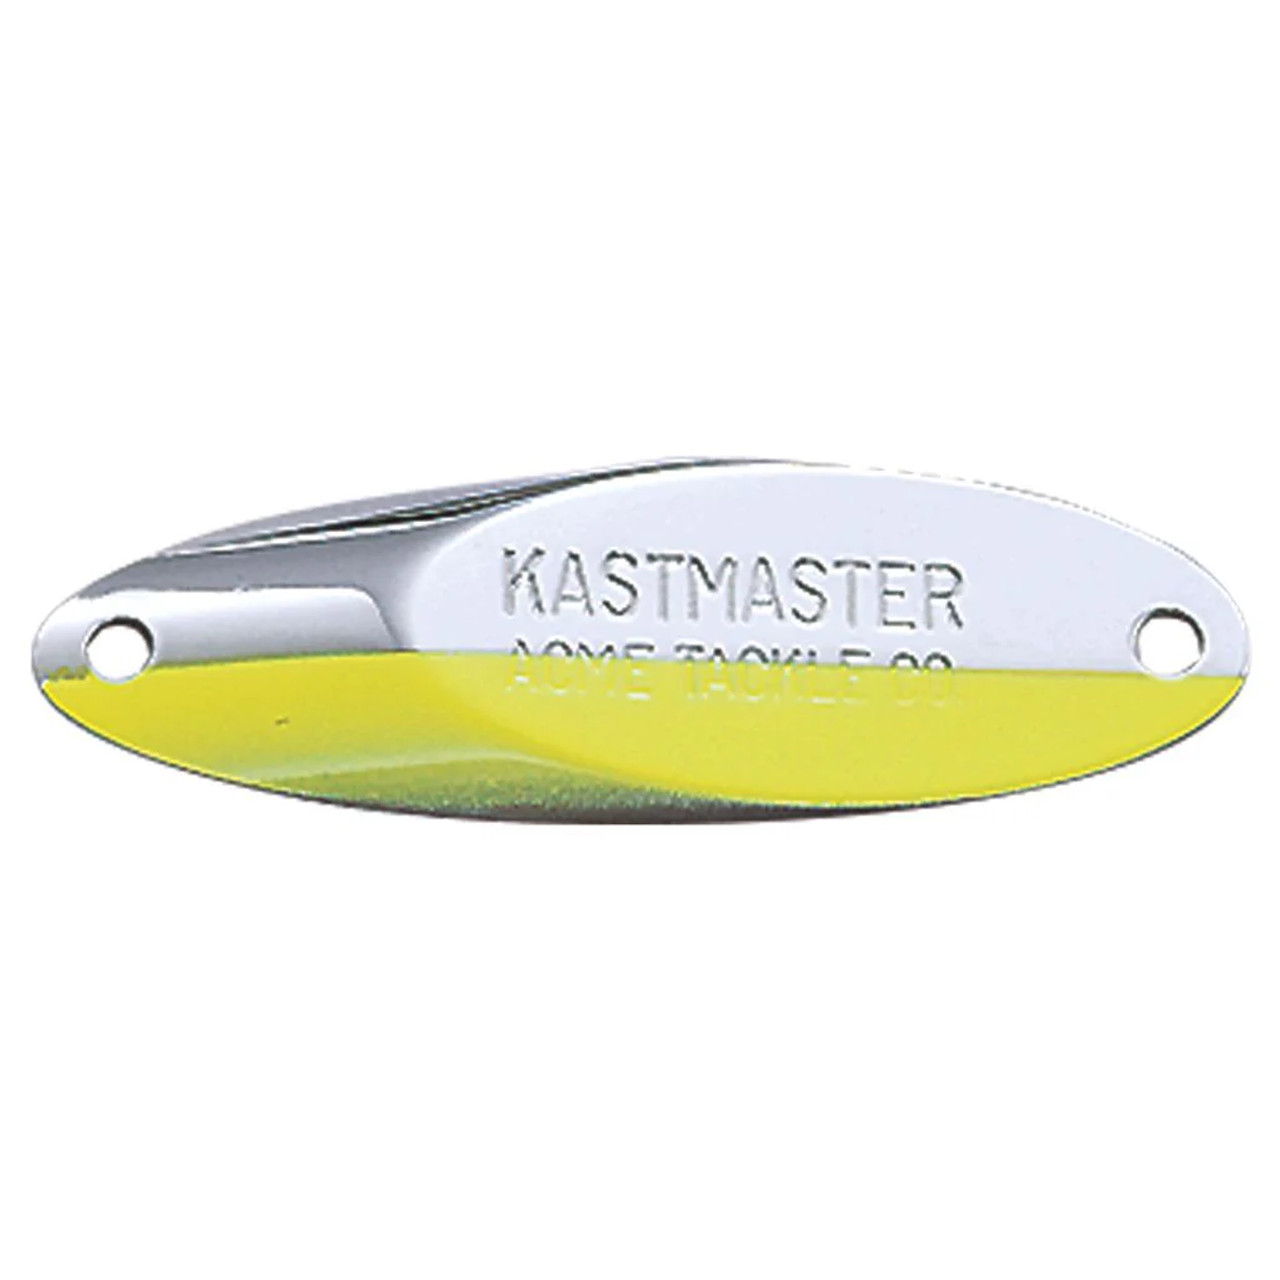 Acme Tackle Kastmaster Spoons - 1OZ - Chrome Chart 